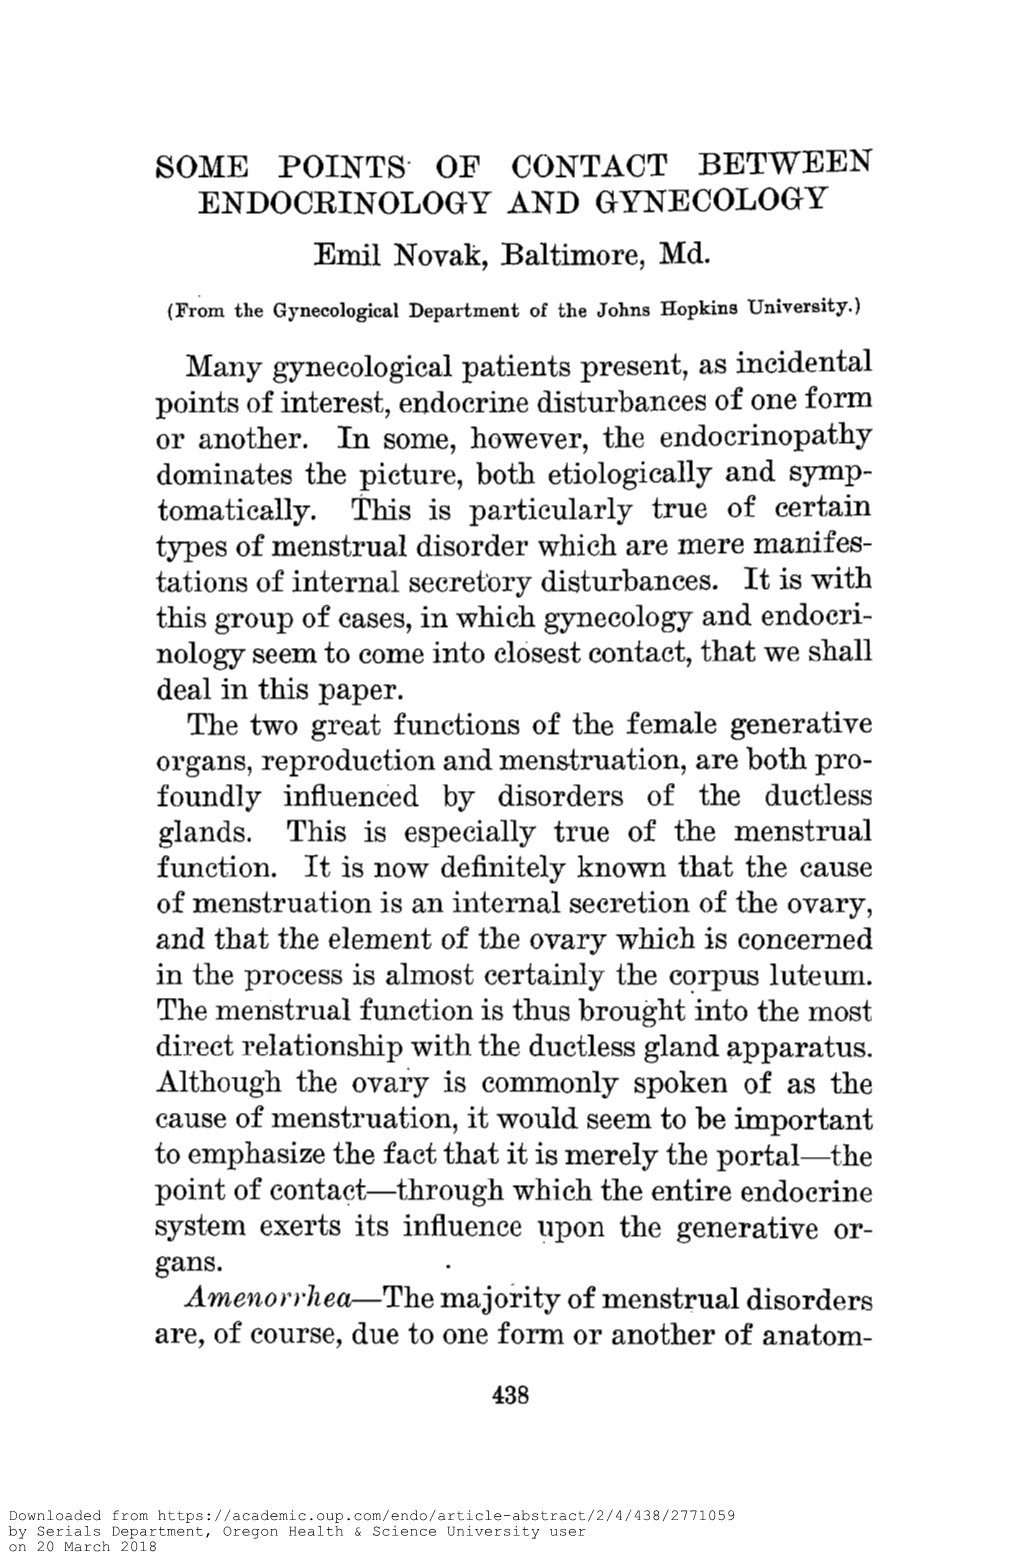 SOME POINTS of CONTACT BETWEEN ENDOCKINOLOGY and GYNECOLOGY Emil Novak, Baltimore, Md